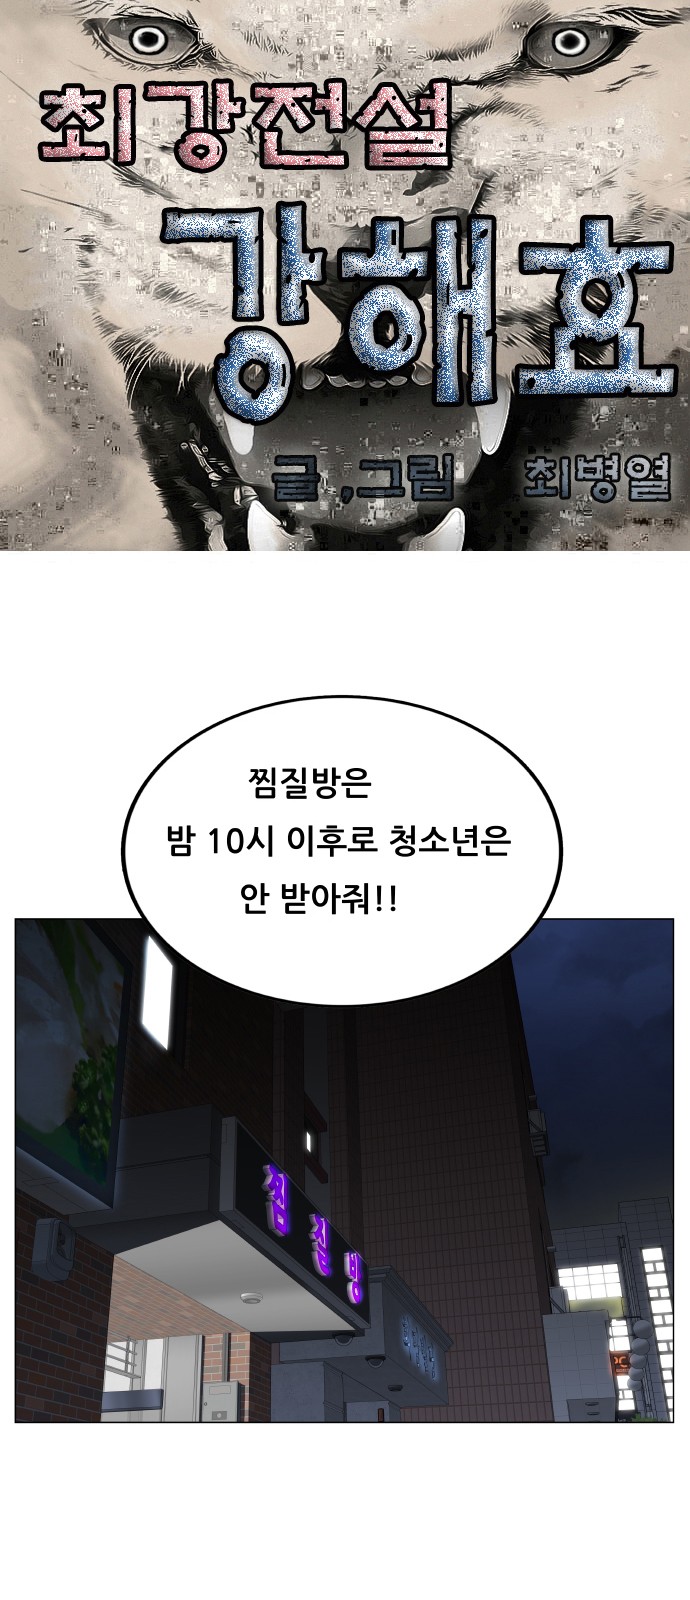 Ultimate Legend - Kang Hae Hyo - Chapter 410 - Page 1